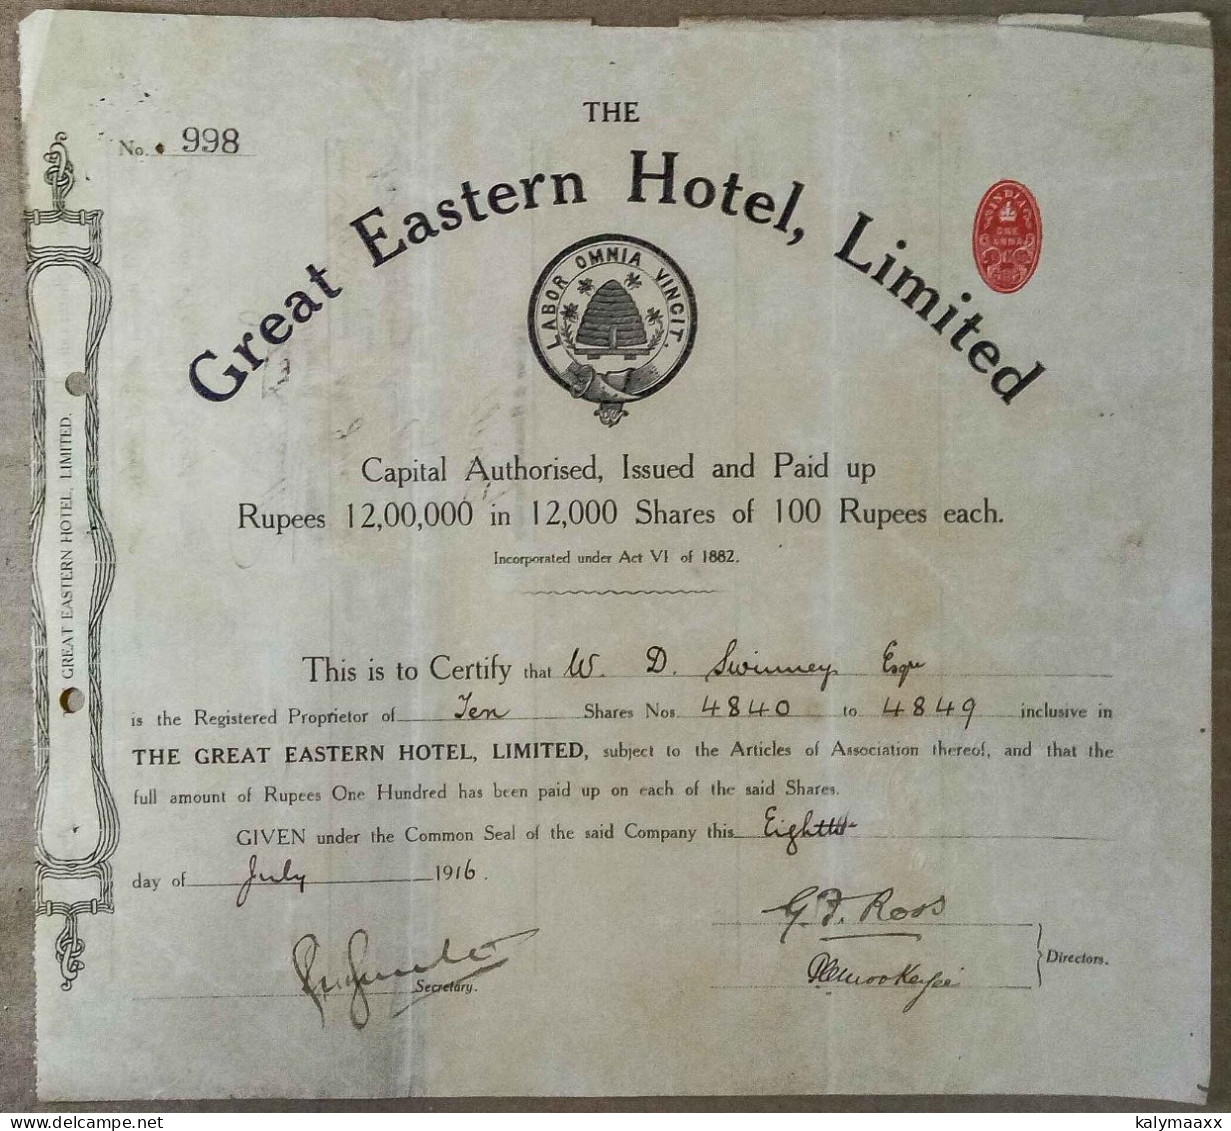 BRITISH INDIA 1916 THE GREAT EASTERN HOTEL LIMITED, HOSPITALITY BUSINESS, HOTEL.....SHARE CERTIFICATE - Tourismus